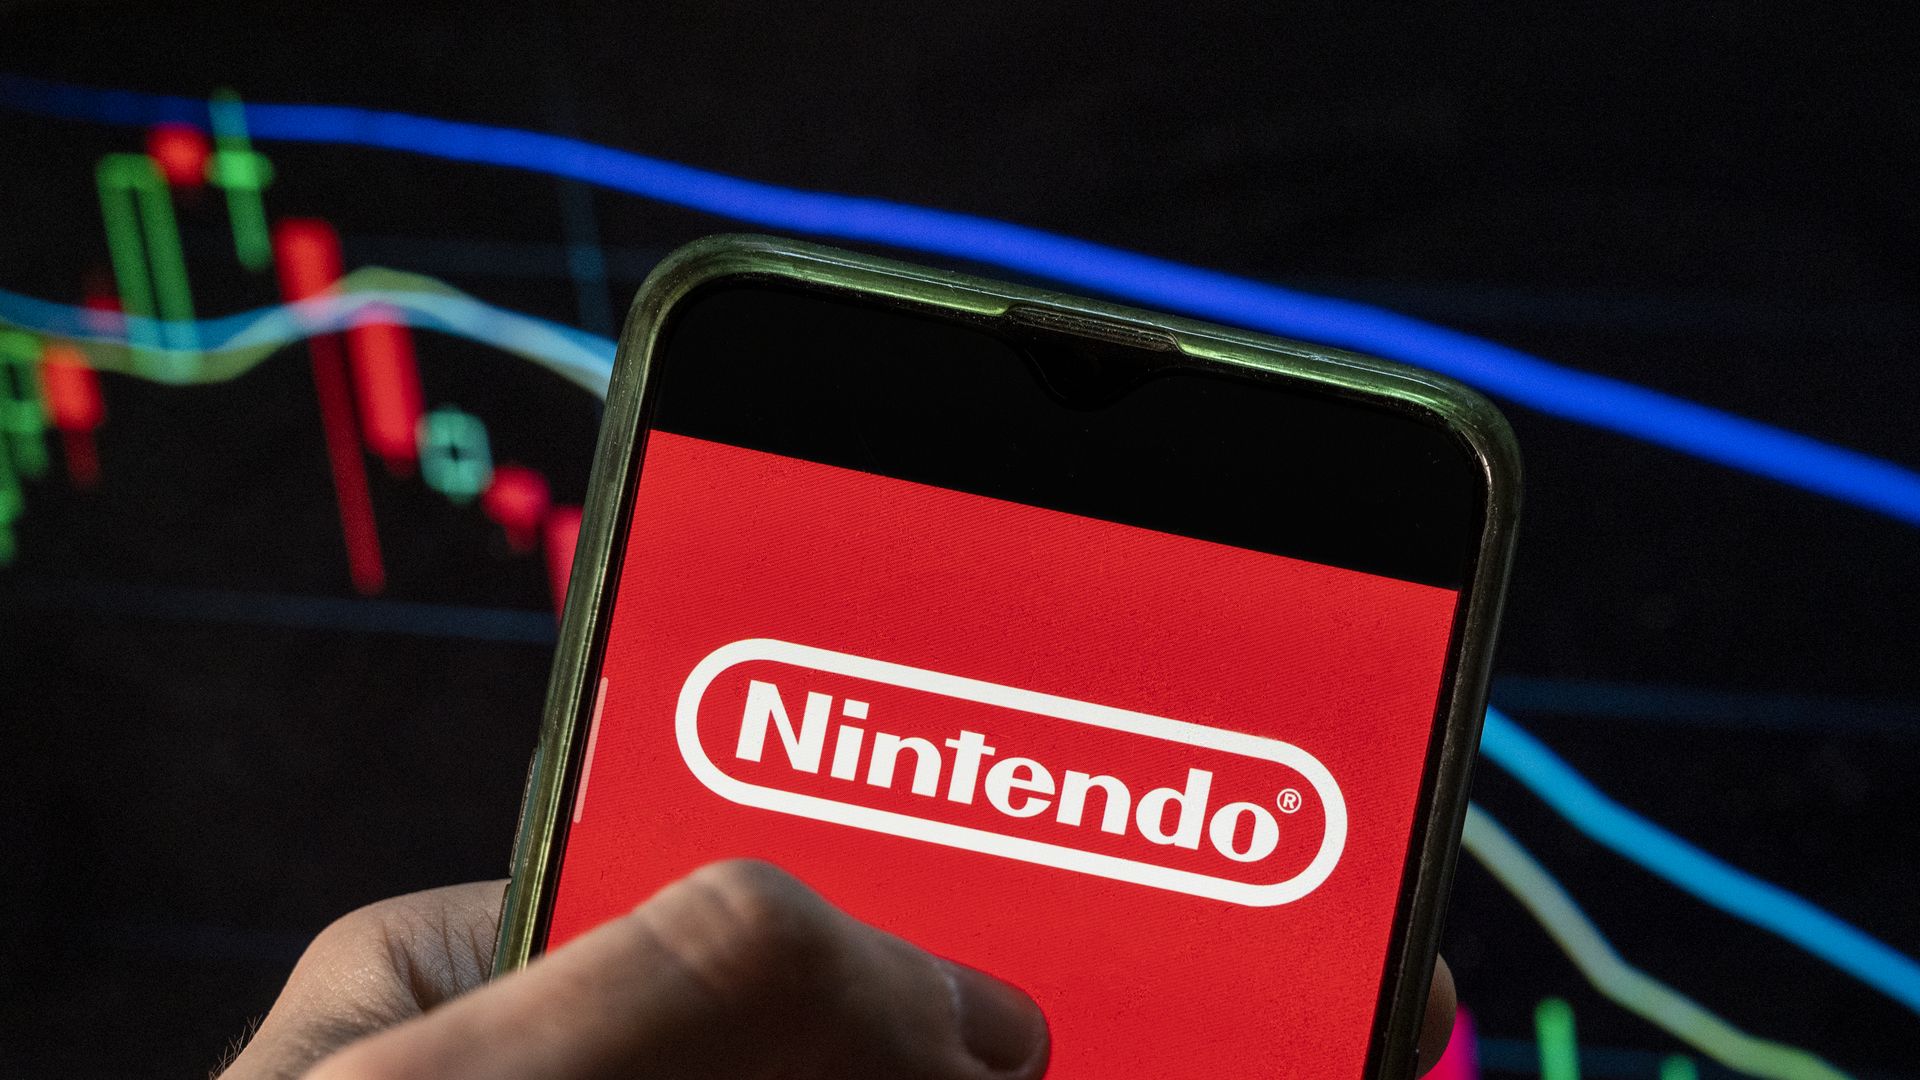 The Nintendo logo is seen on a mobile device.